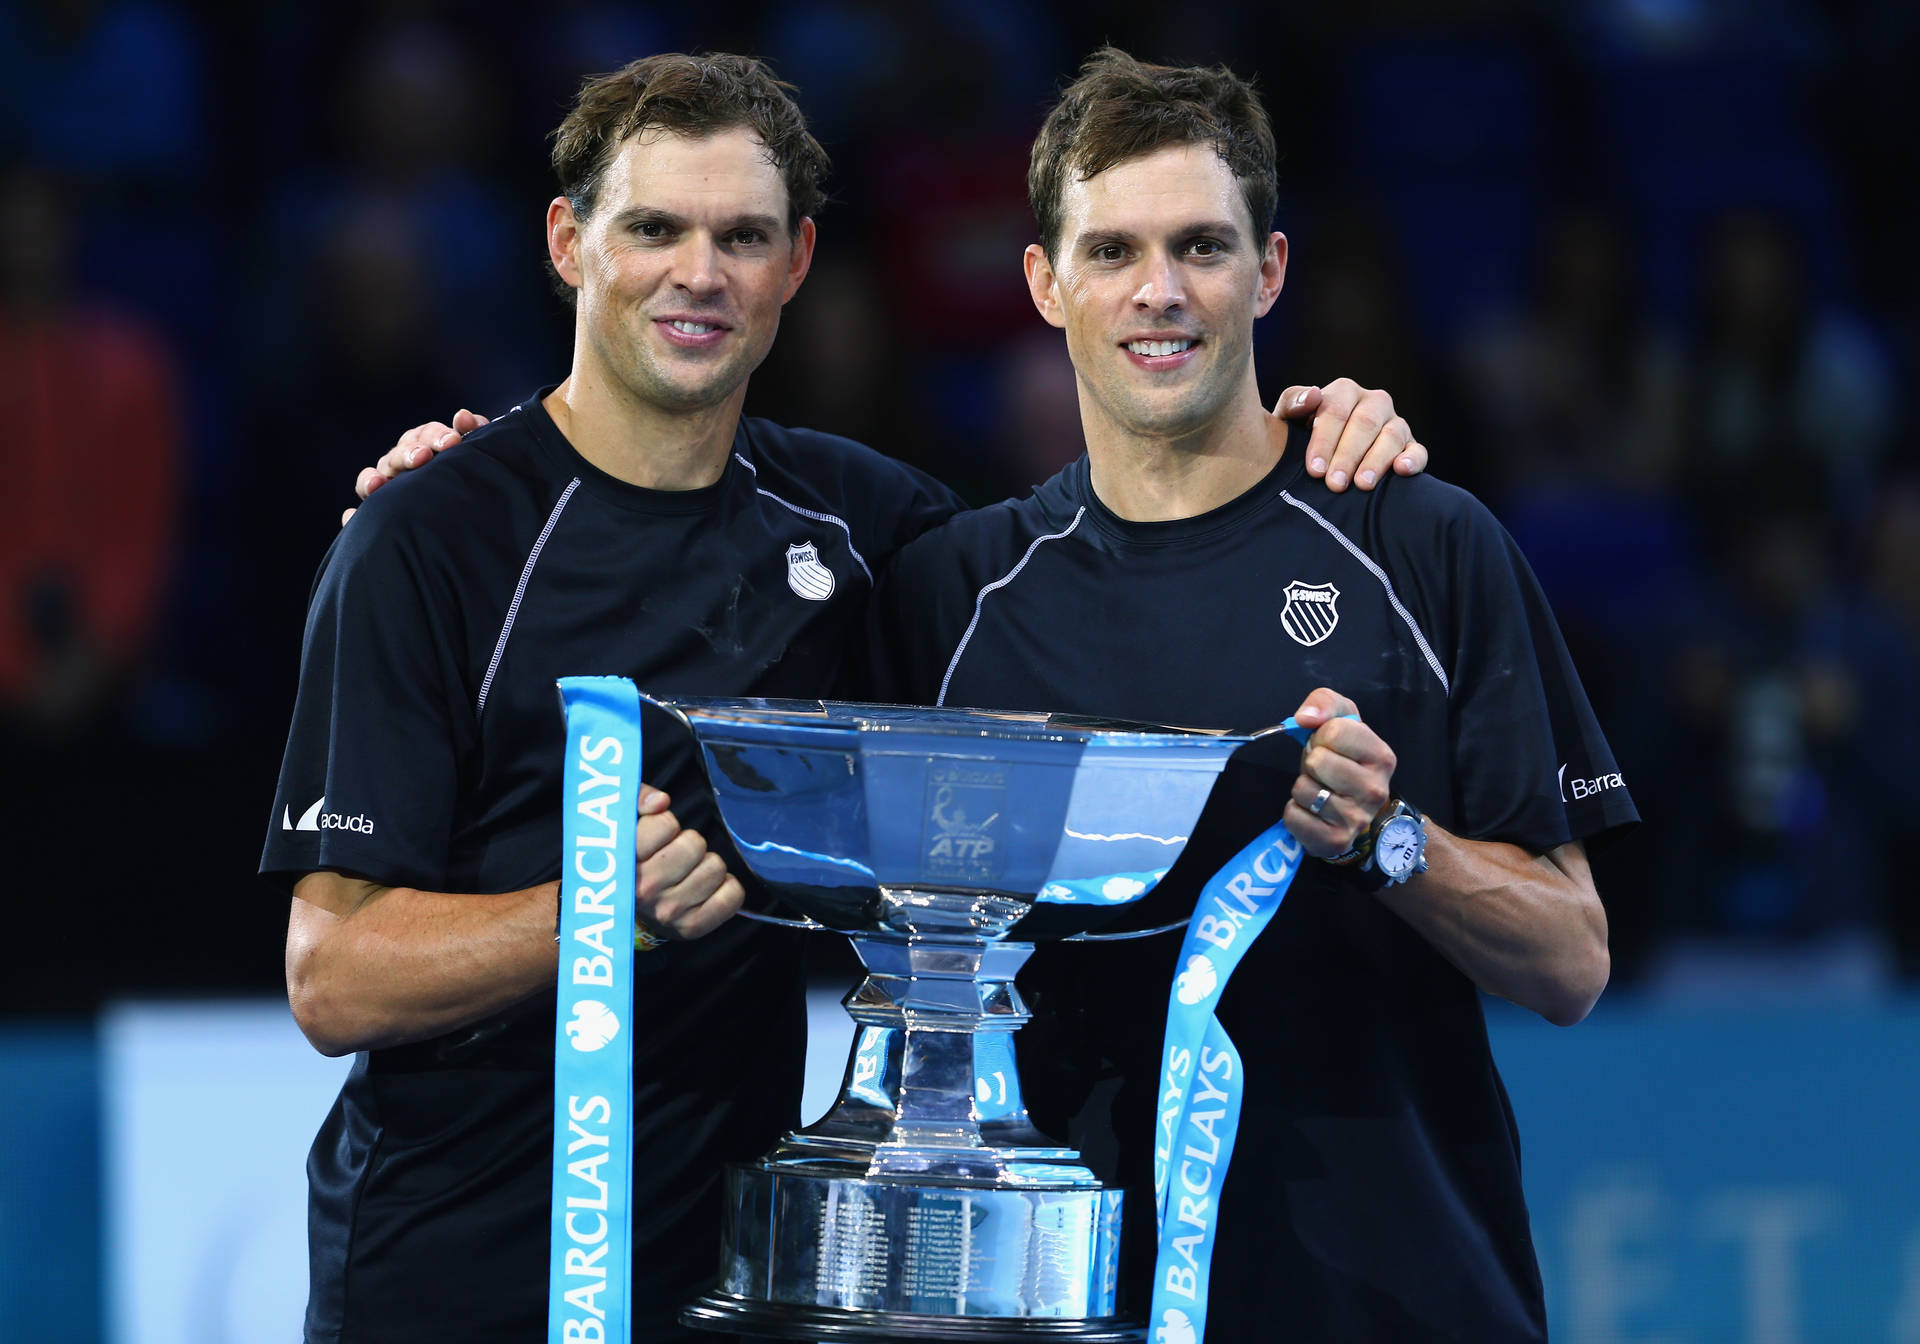 Brothers Bob and Mike Bryan Holding Winning Tennis Trophy Wallpaper